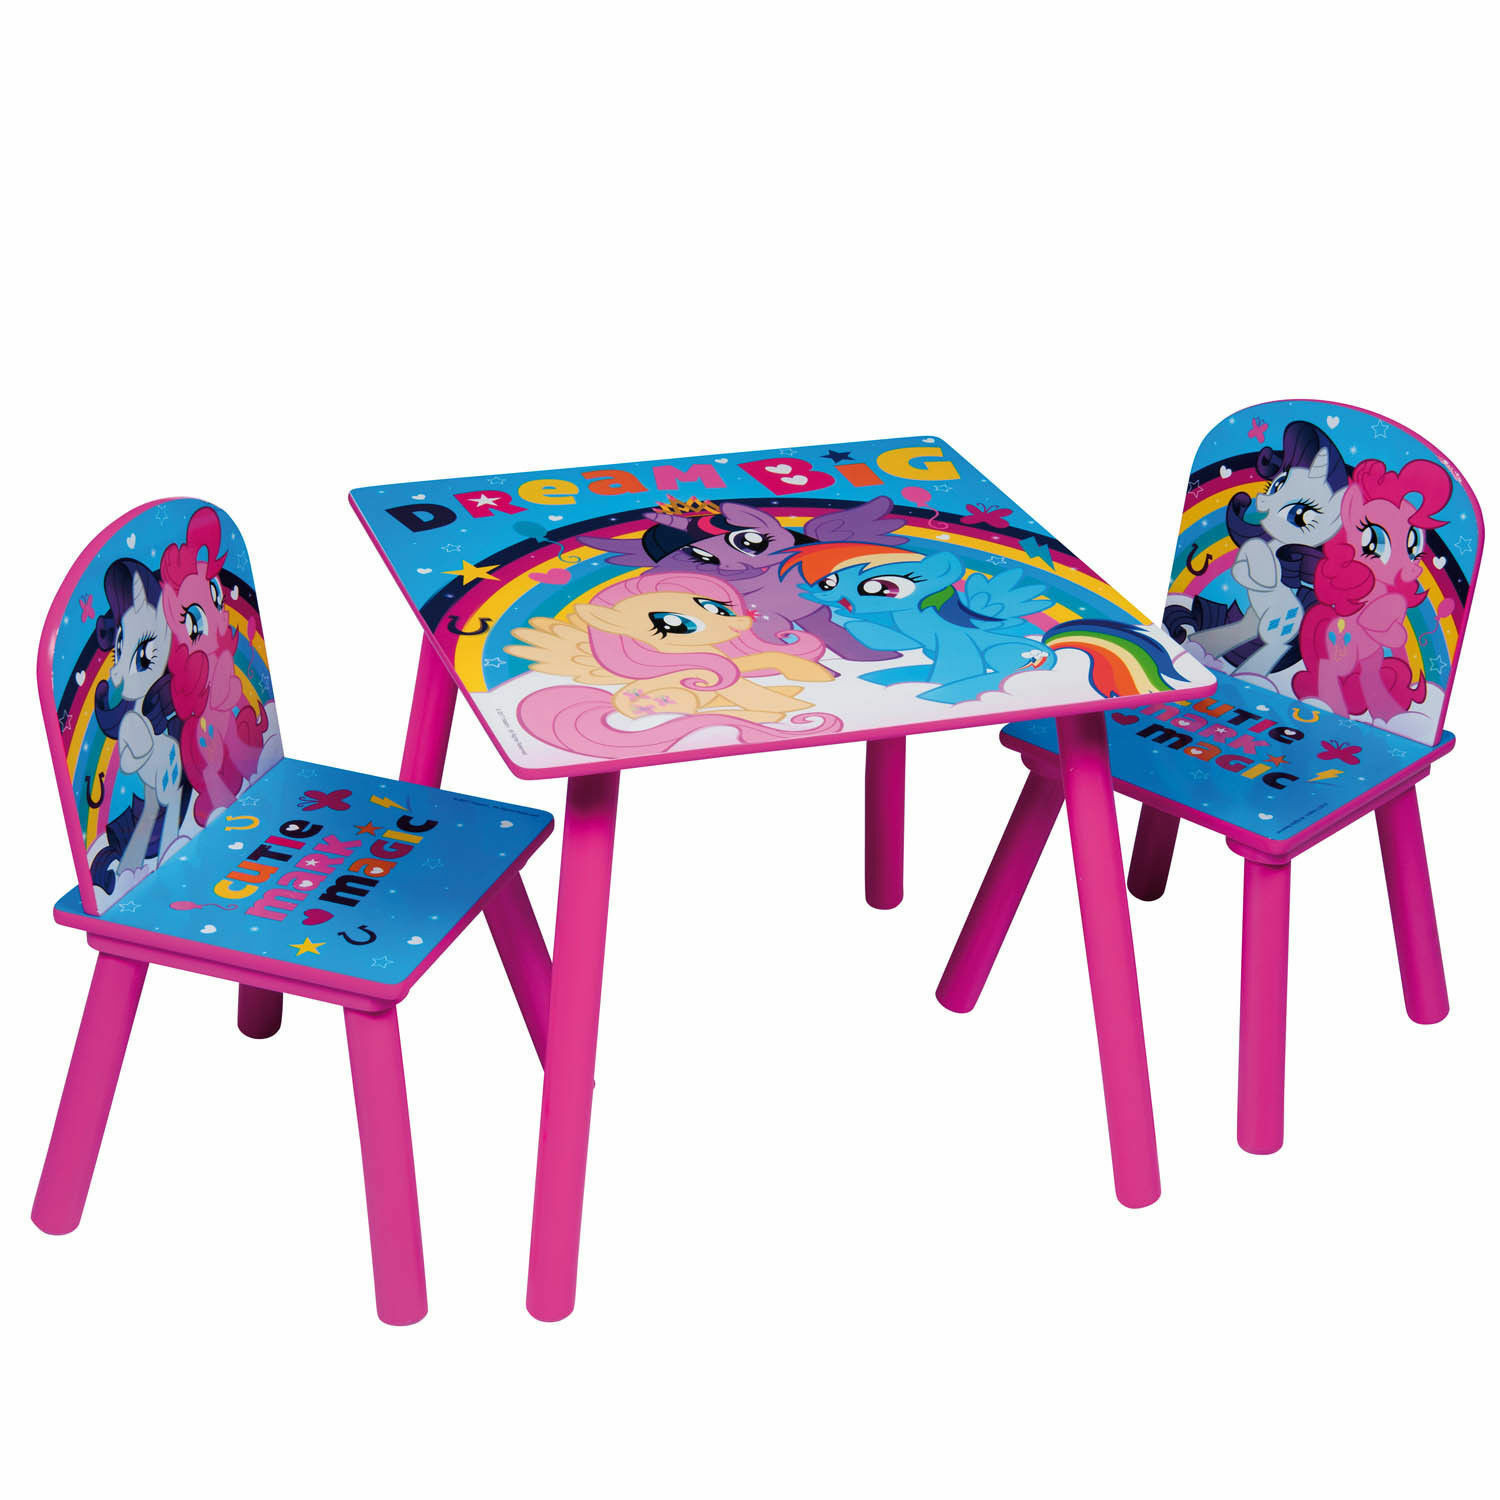 Little Kids Table And Chairs
 My Little Pony Childrens Wooden Table and Chair Set Kids